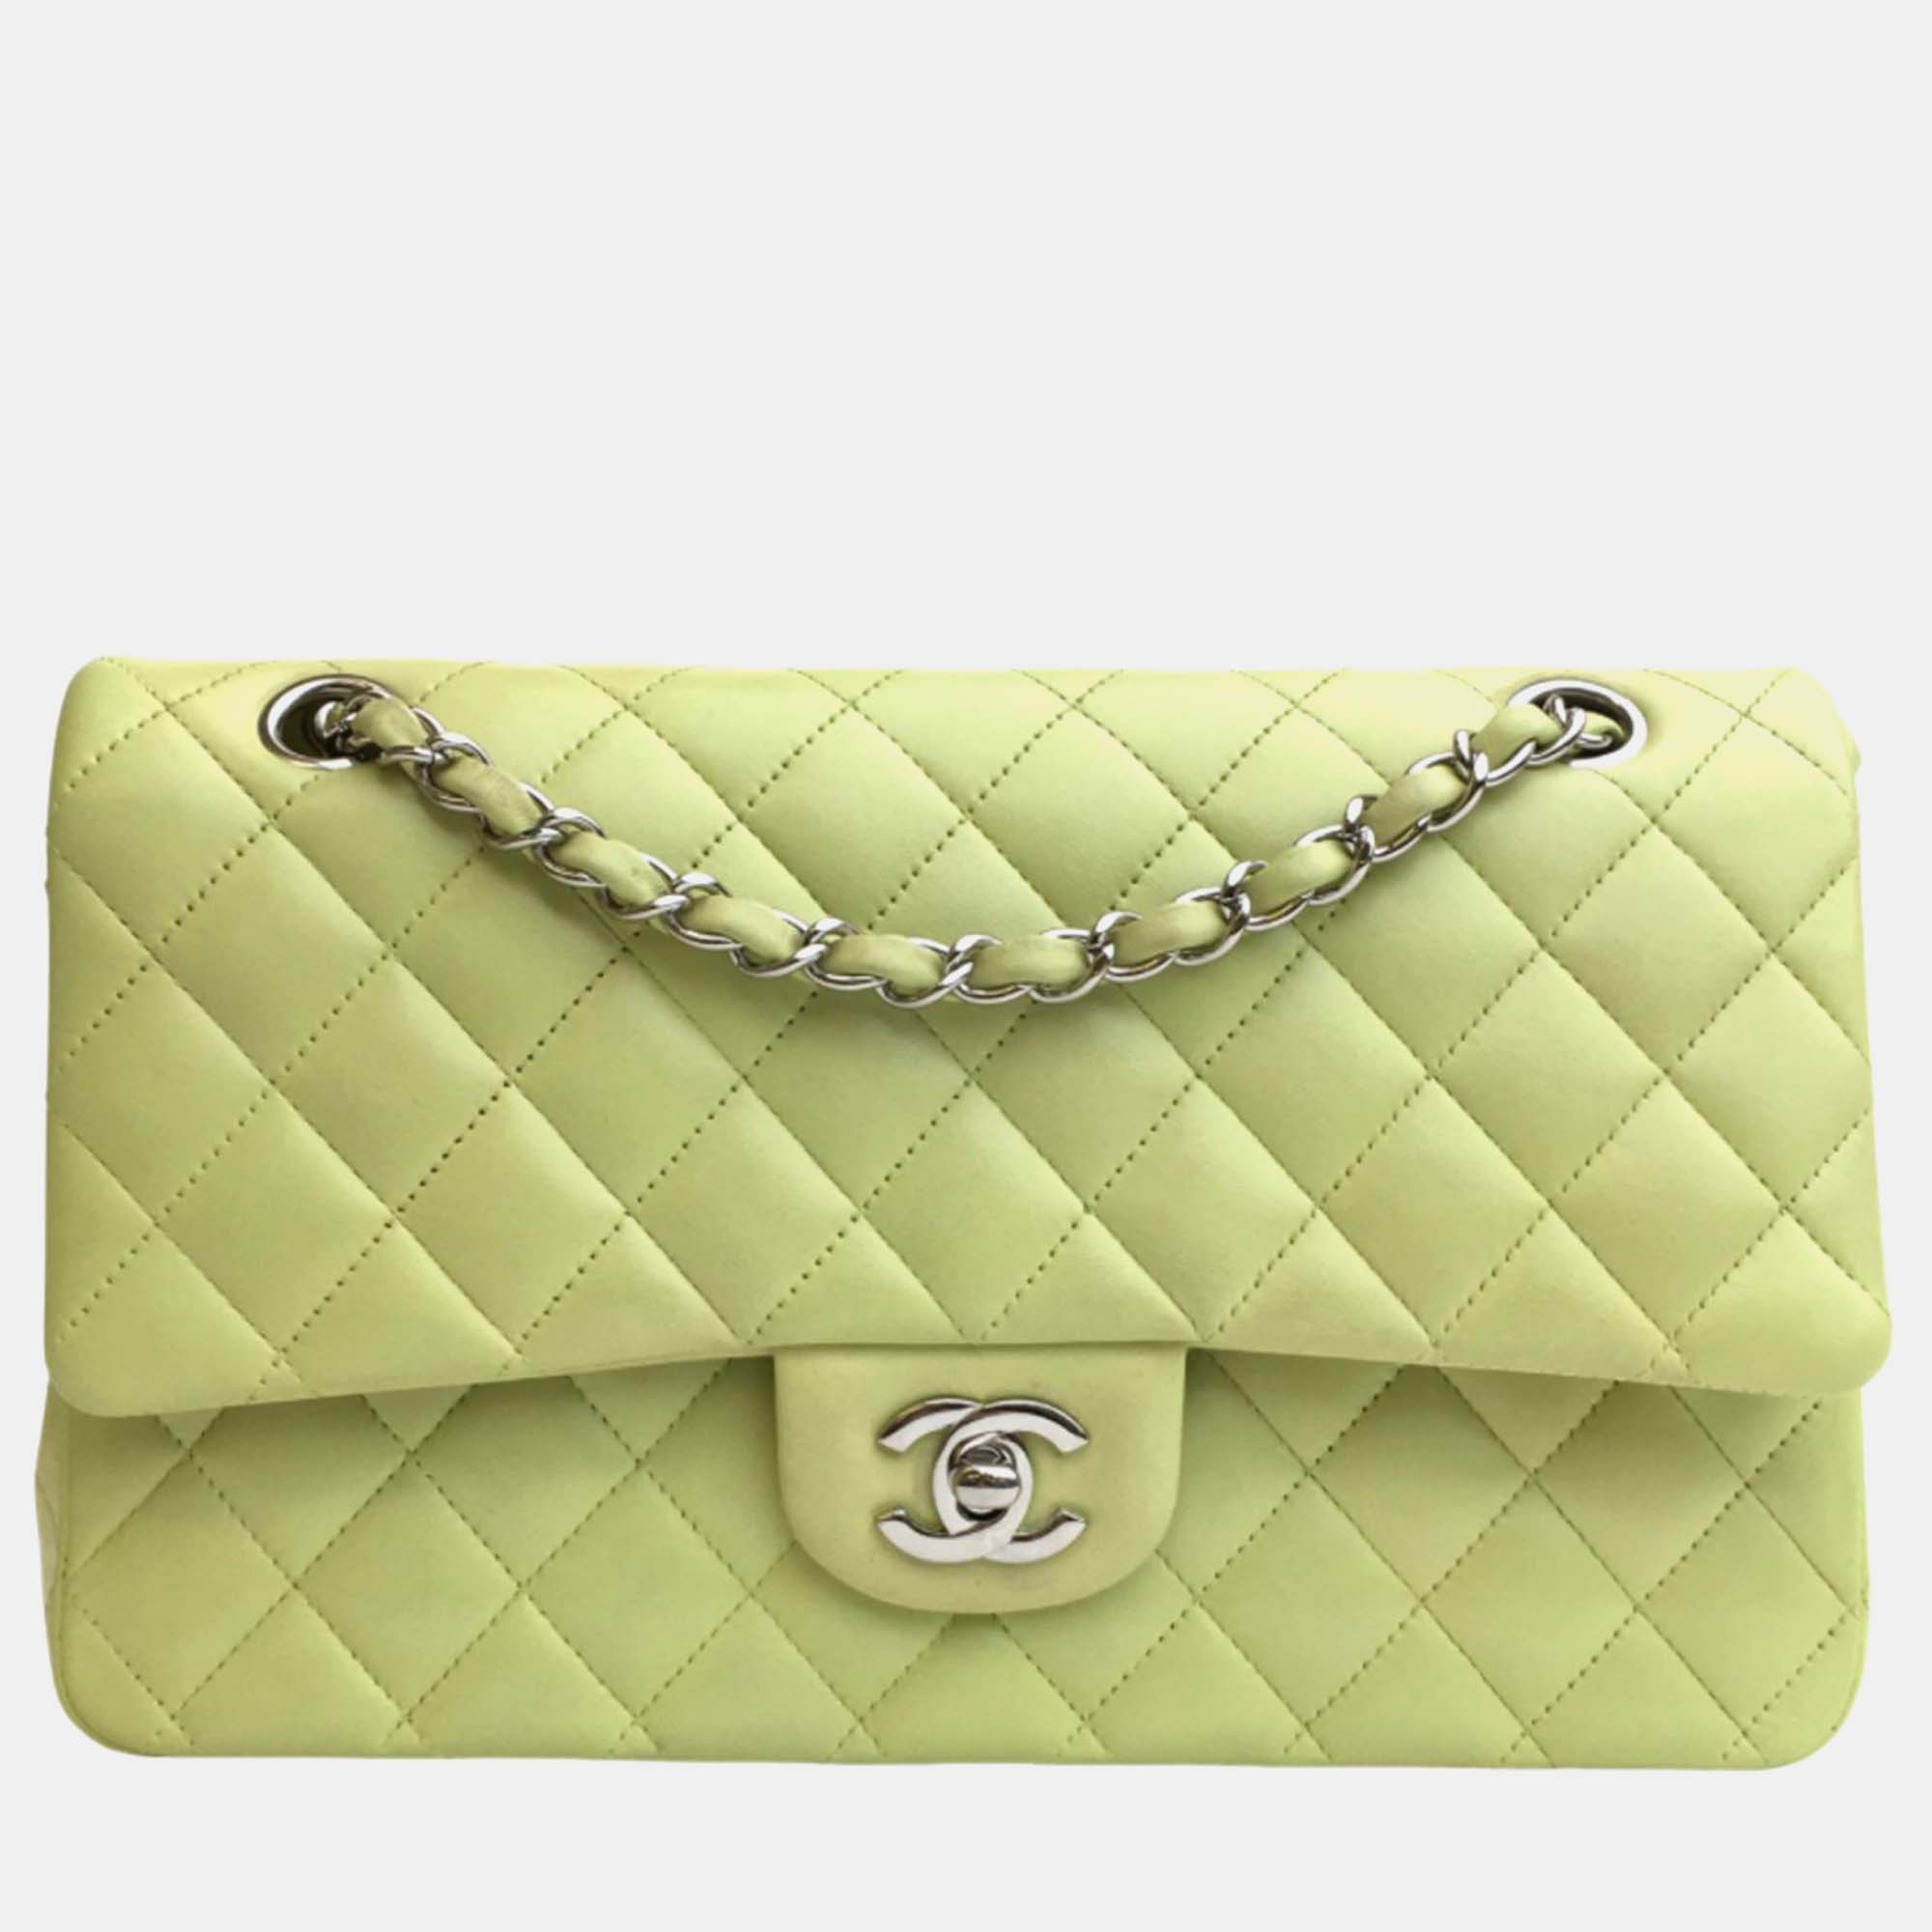 Chanel green lambskin leather medium classic double flap shoulder bags